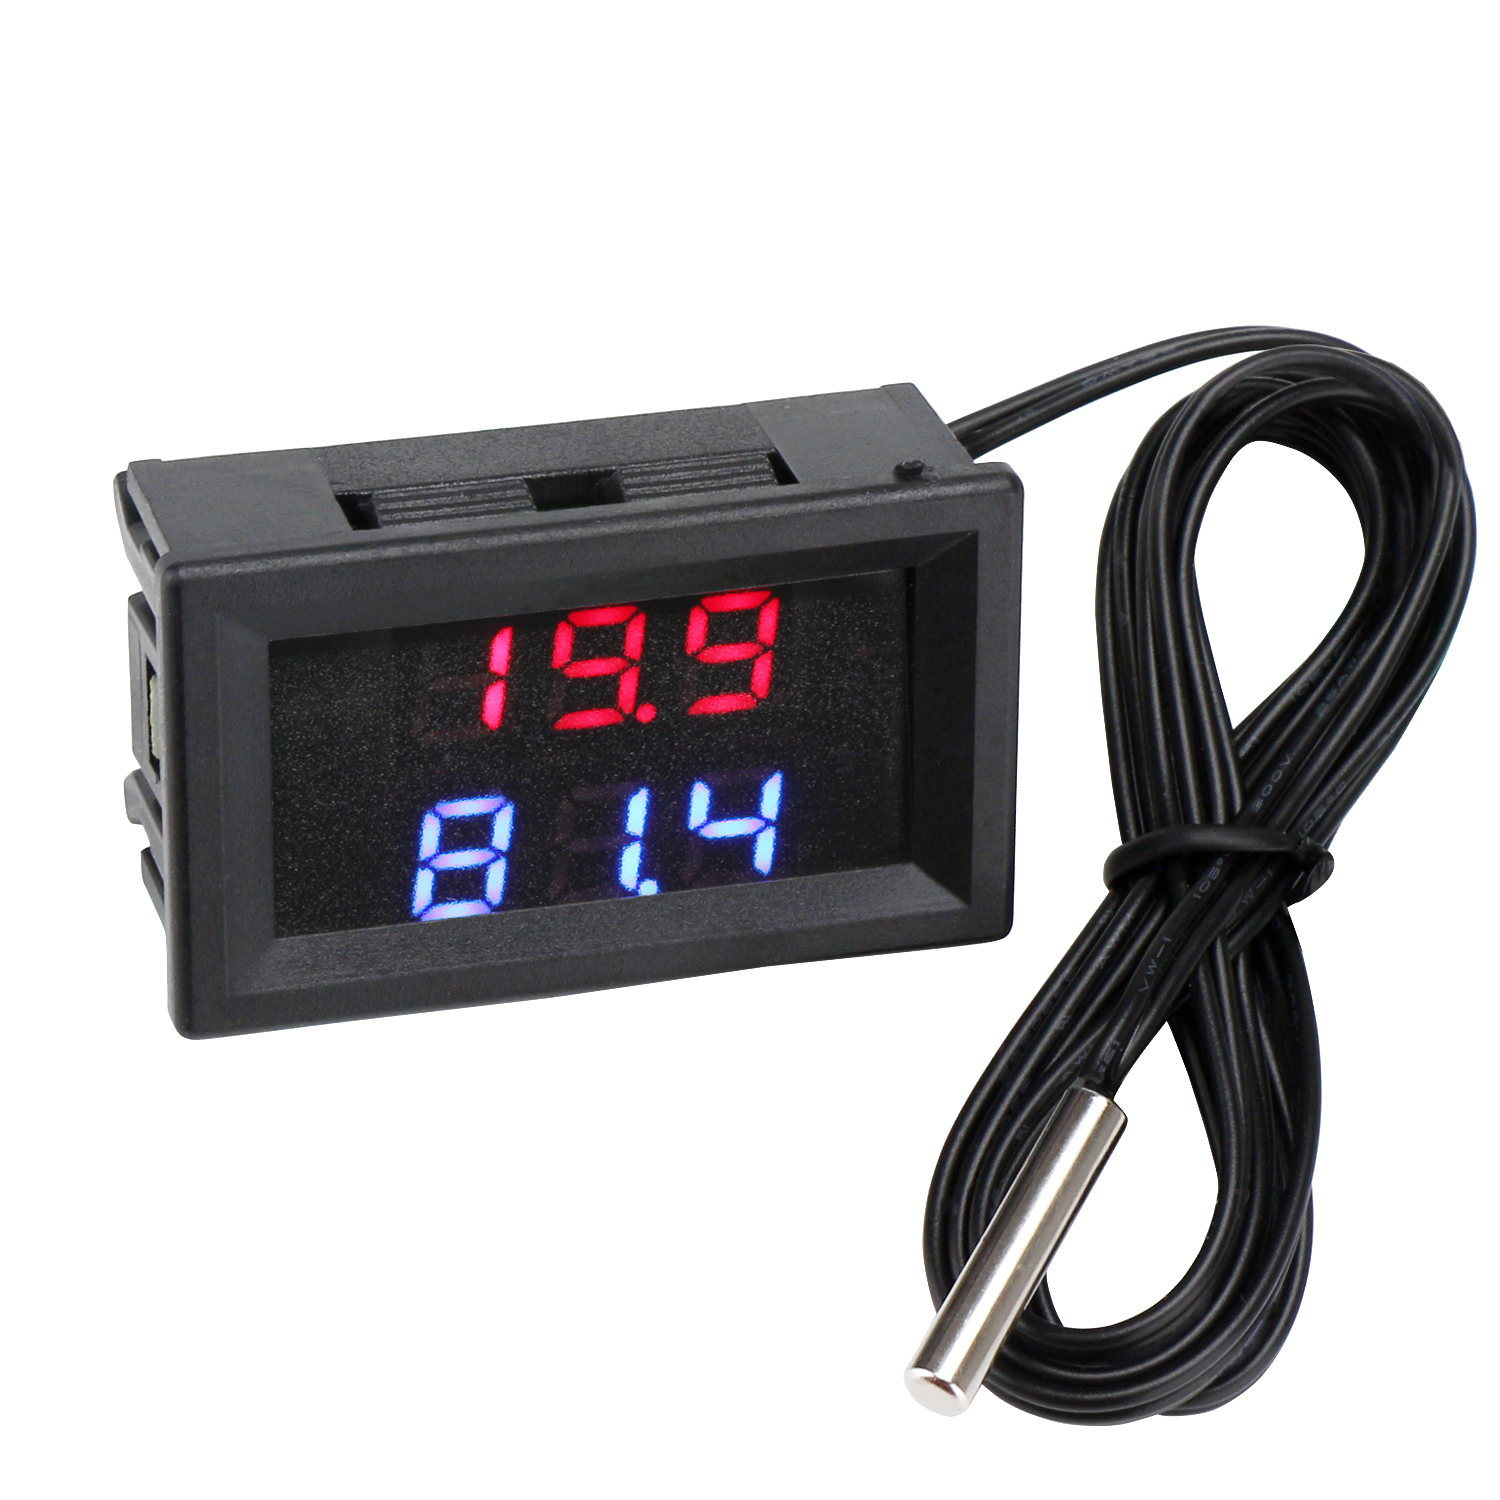 12V LED Temp Monitoring Thermometer Meter W/ Temp Probe High Quality New 